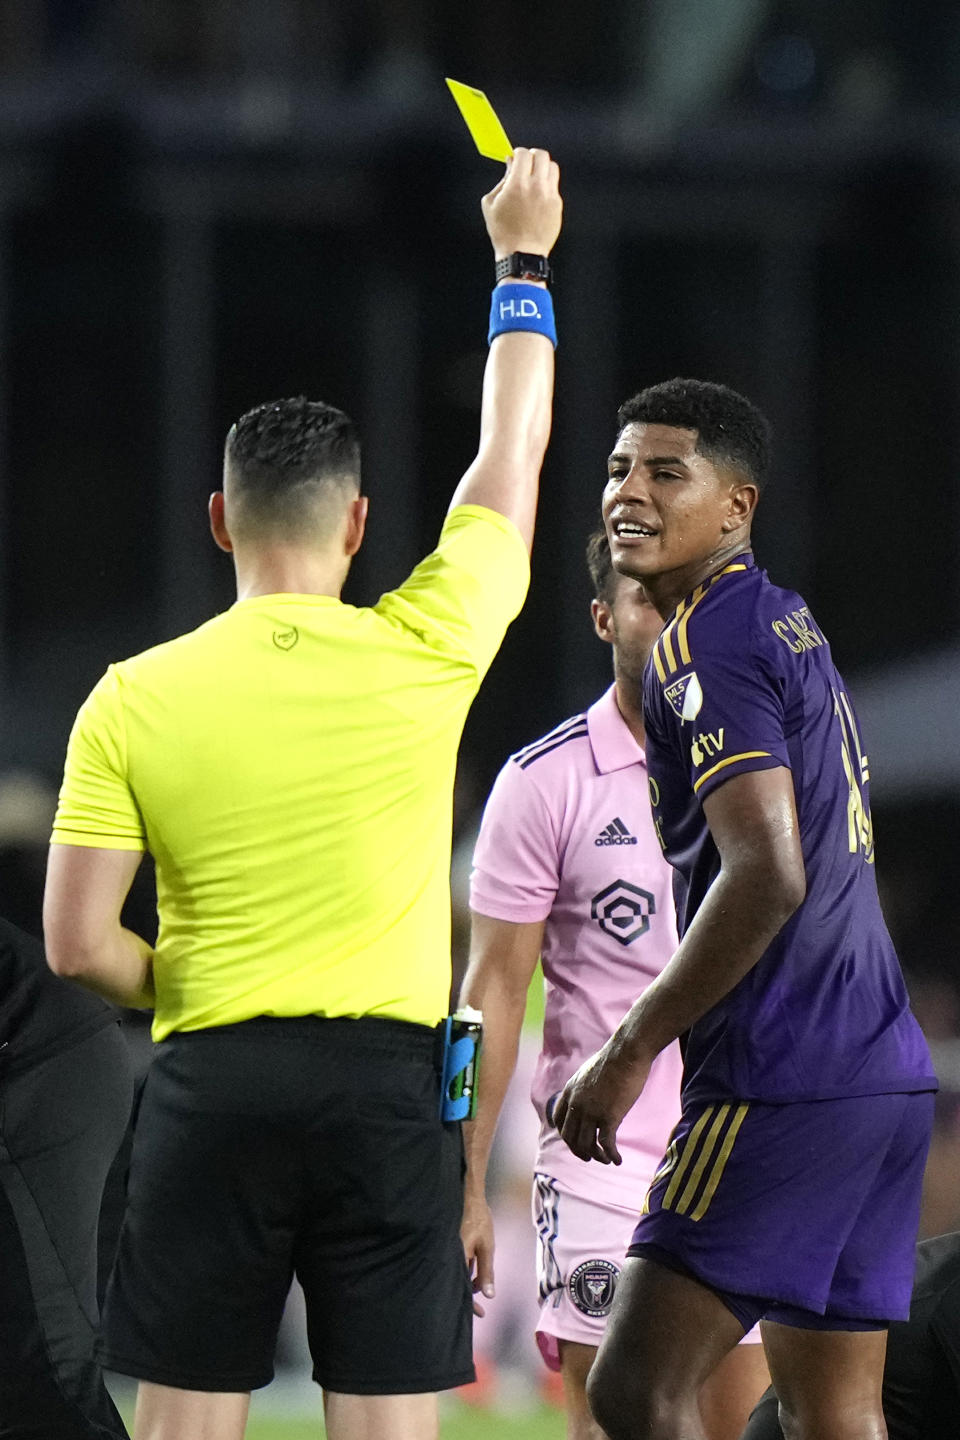 Orlando City midfielder Wilder Cartagena, right, is given a yellow card by an official during the first half of an MLS soccer match against Inter Miami, Saturday, May 20, 2023, in Fort Lauderdale, Fla. (AP Photo/Lynne Sladky)